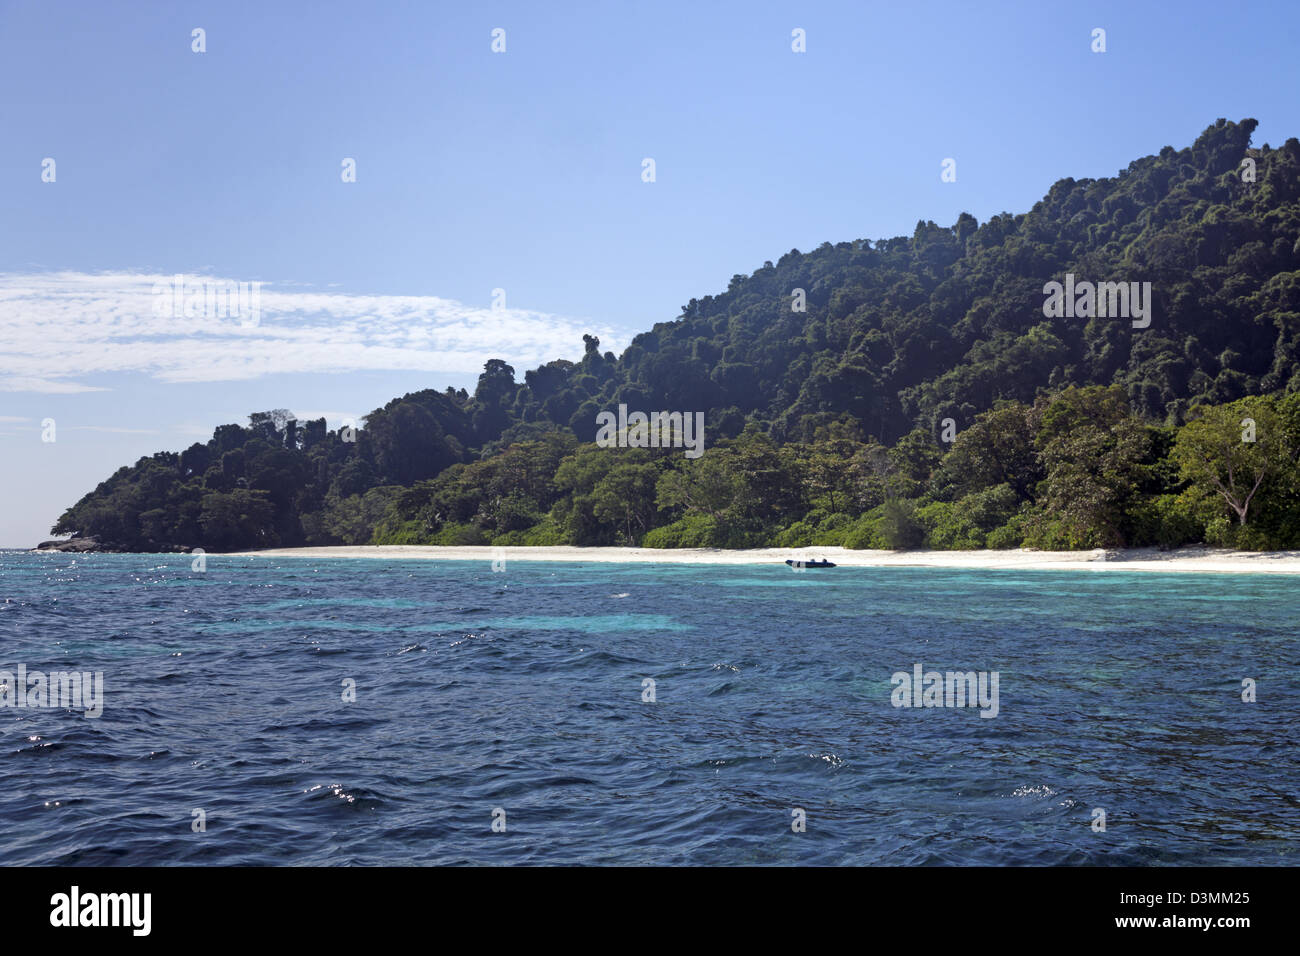 Thai island of Koh Tachai from the Andaman Sea showing tropical rainforest and white sands Stock Photo